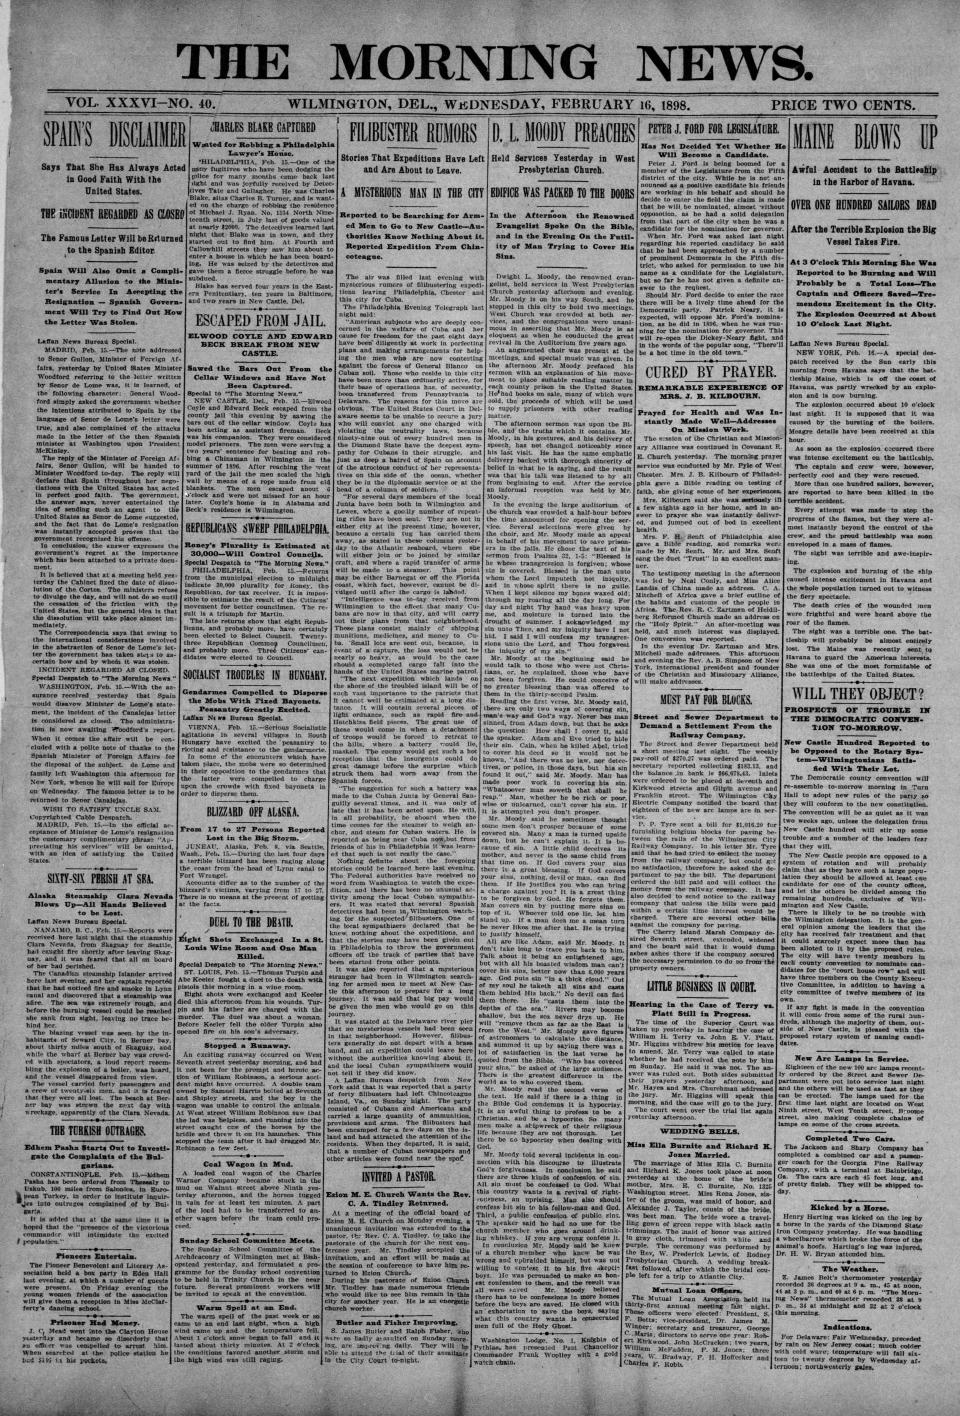 Front page of The Morning News from Feb. 16, 1898.